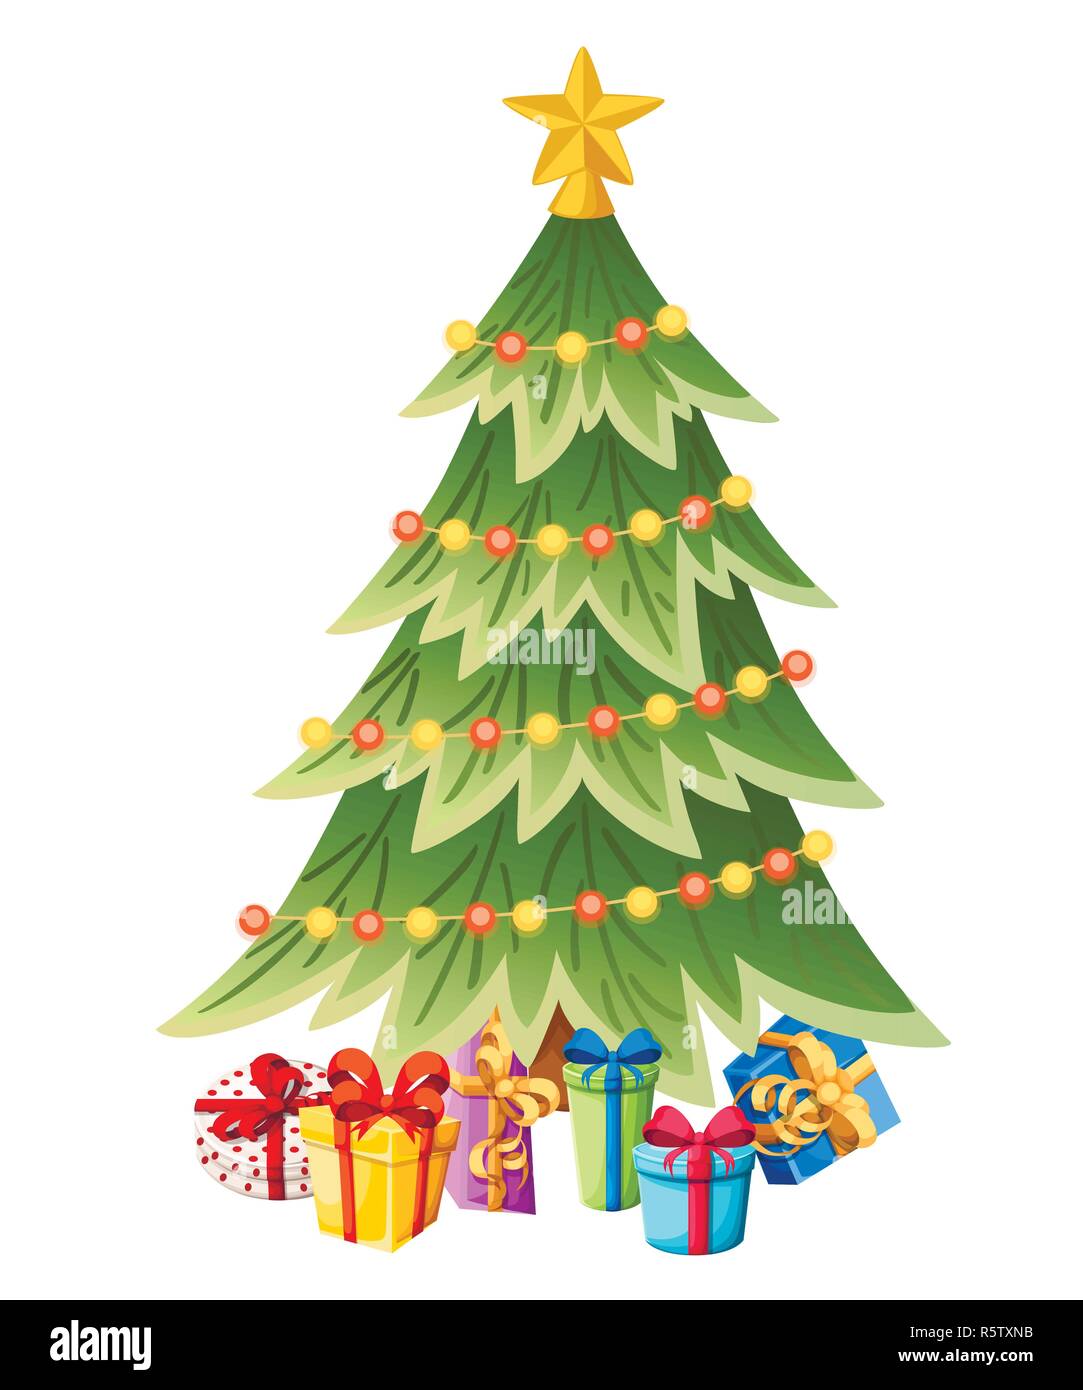 Decorated christmas tree with gift boxes, star, lights, decoration balls. Merry Christmas and happy new year. Green spruce, evergreen tree. Flat vecto Stock Vector